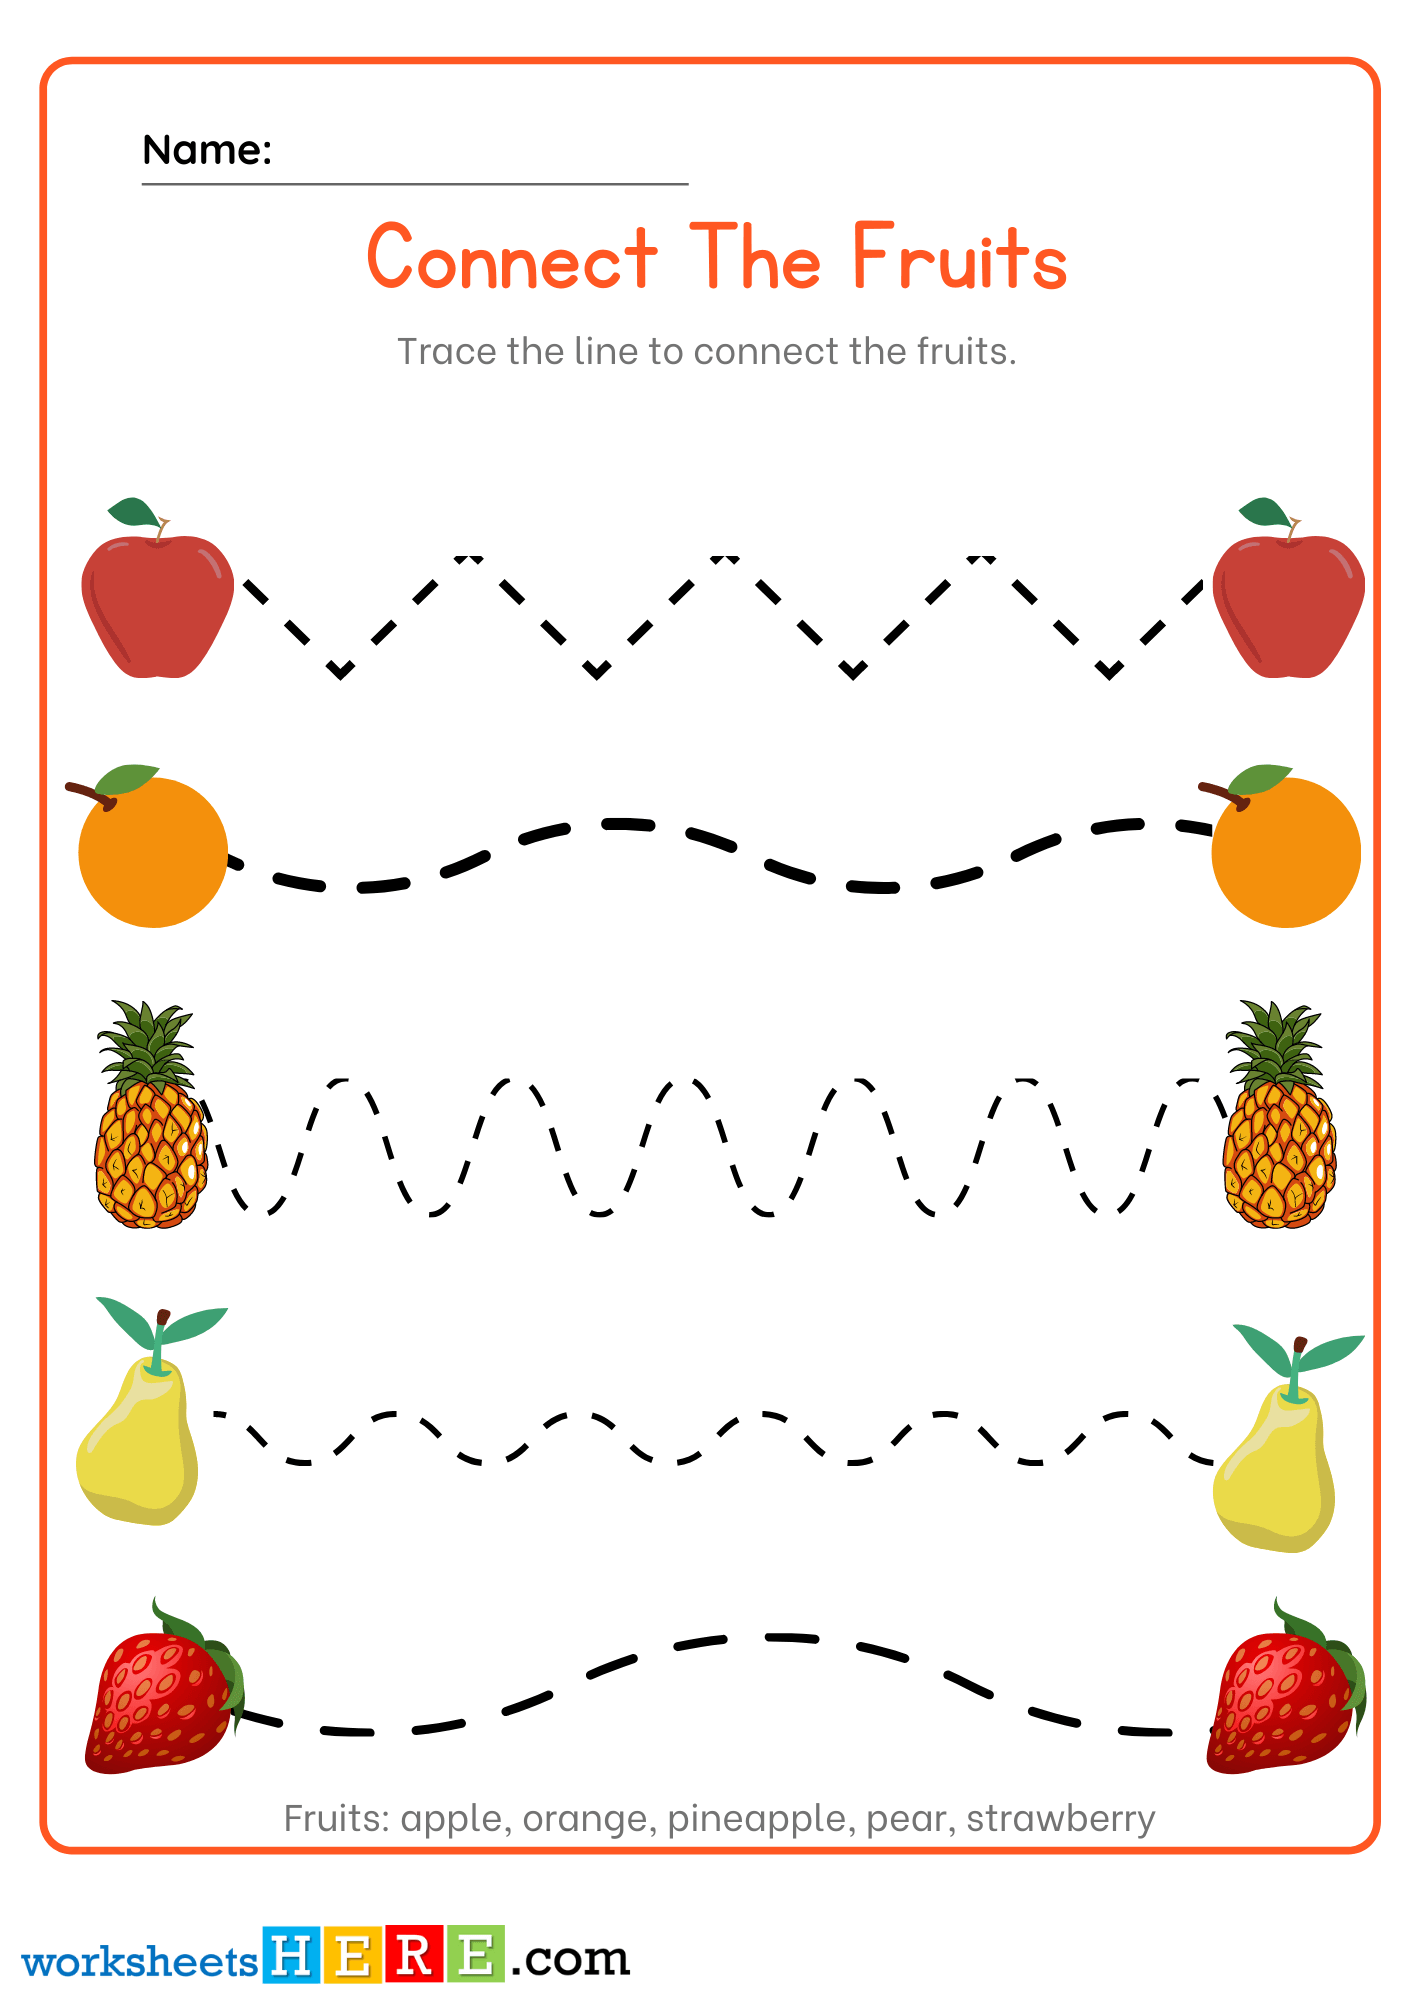 Connect The Fruits, Tracing Lines PDF Worksheets For Kindergarten